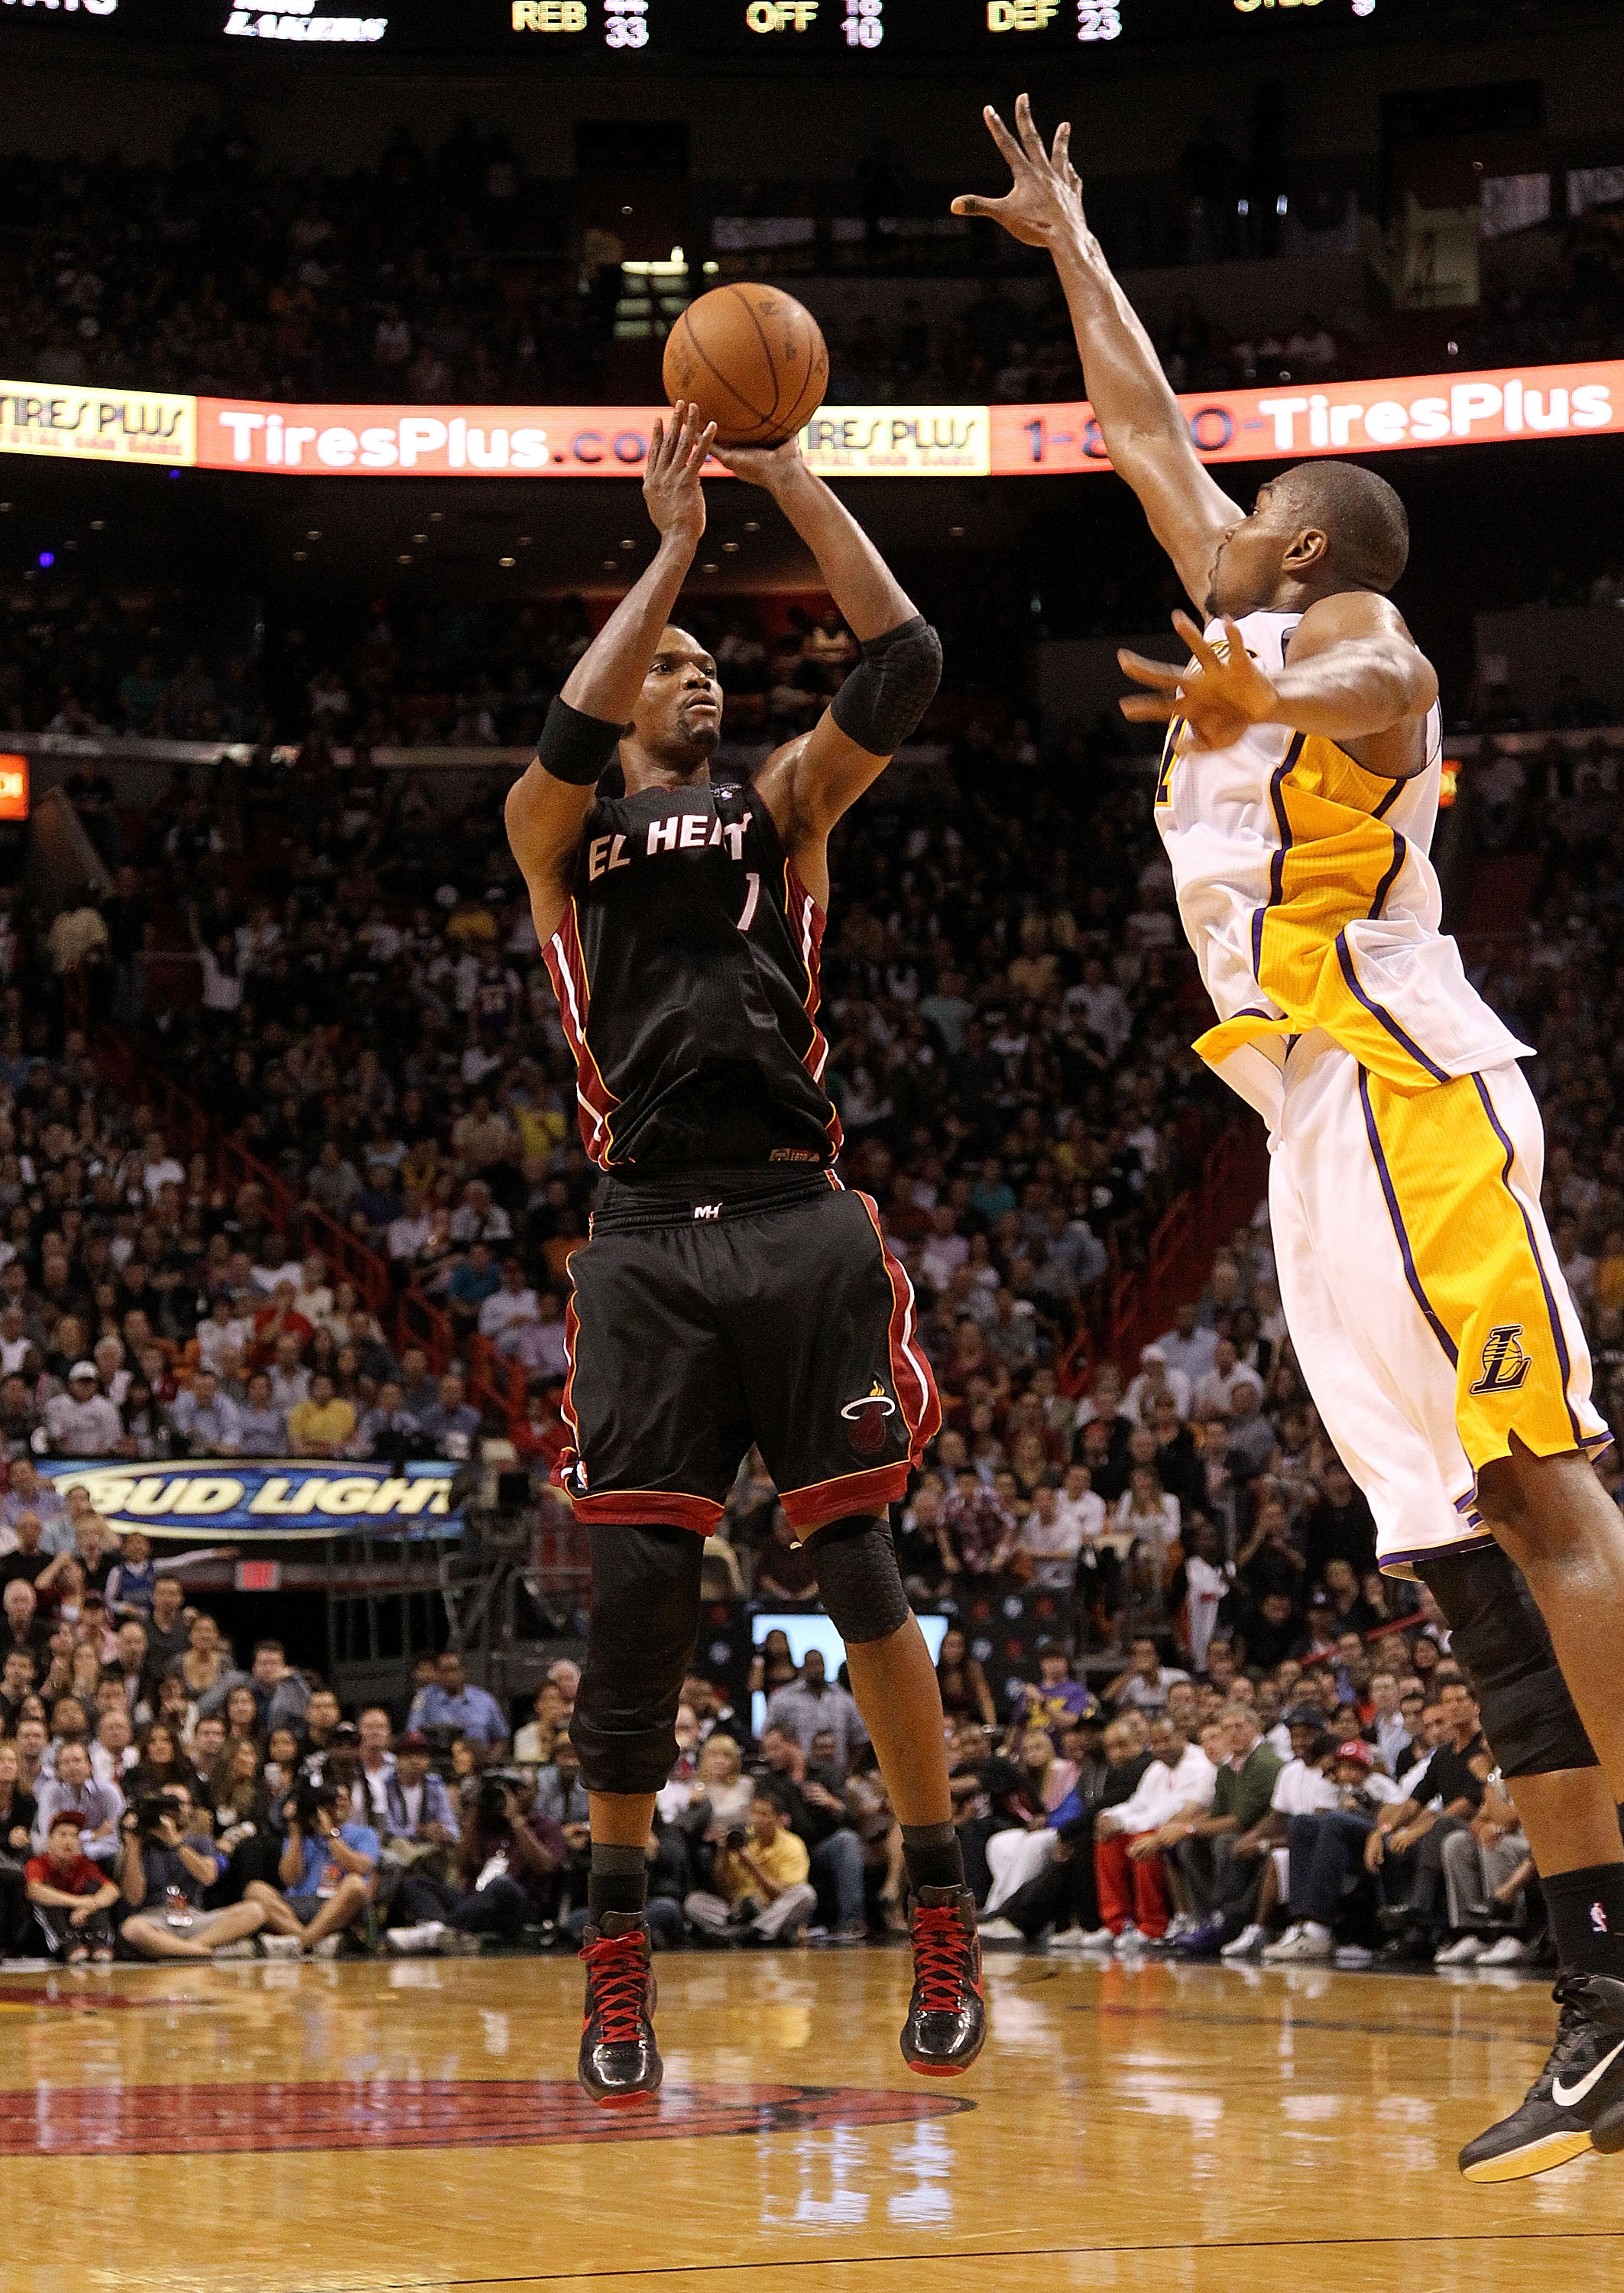 MIAMI, FL - MARCH 10:  Chris Bosh #1 of the Miami Heat shoots over Andrew Bynum #17 of  the Los Angeles Lakers  during a game at American Airlines Arena on March 10, 2011 in Miami, Florida. NOTE TO USER: User expressly acknowledges and agrees that, by dow